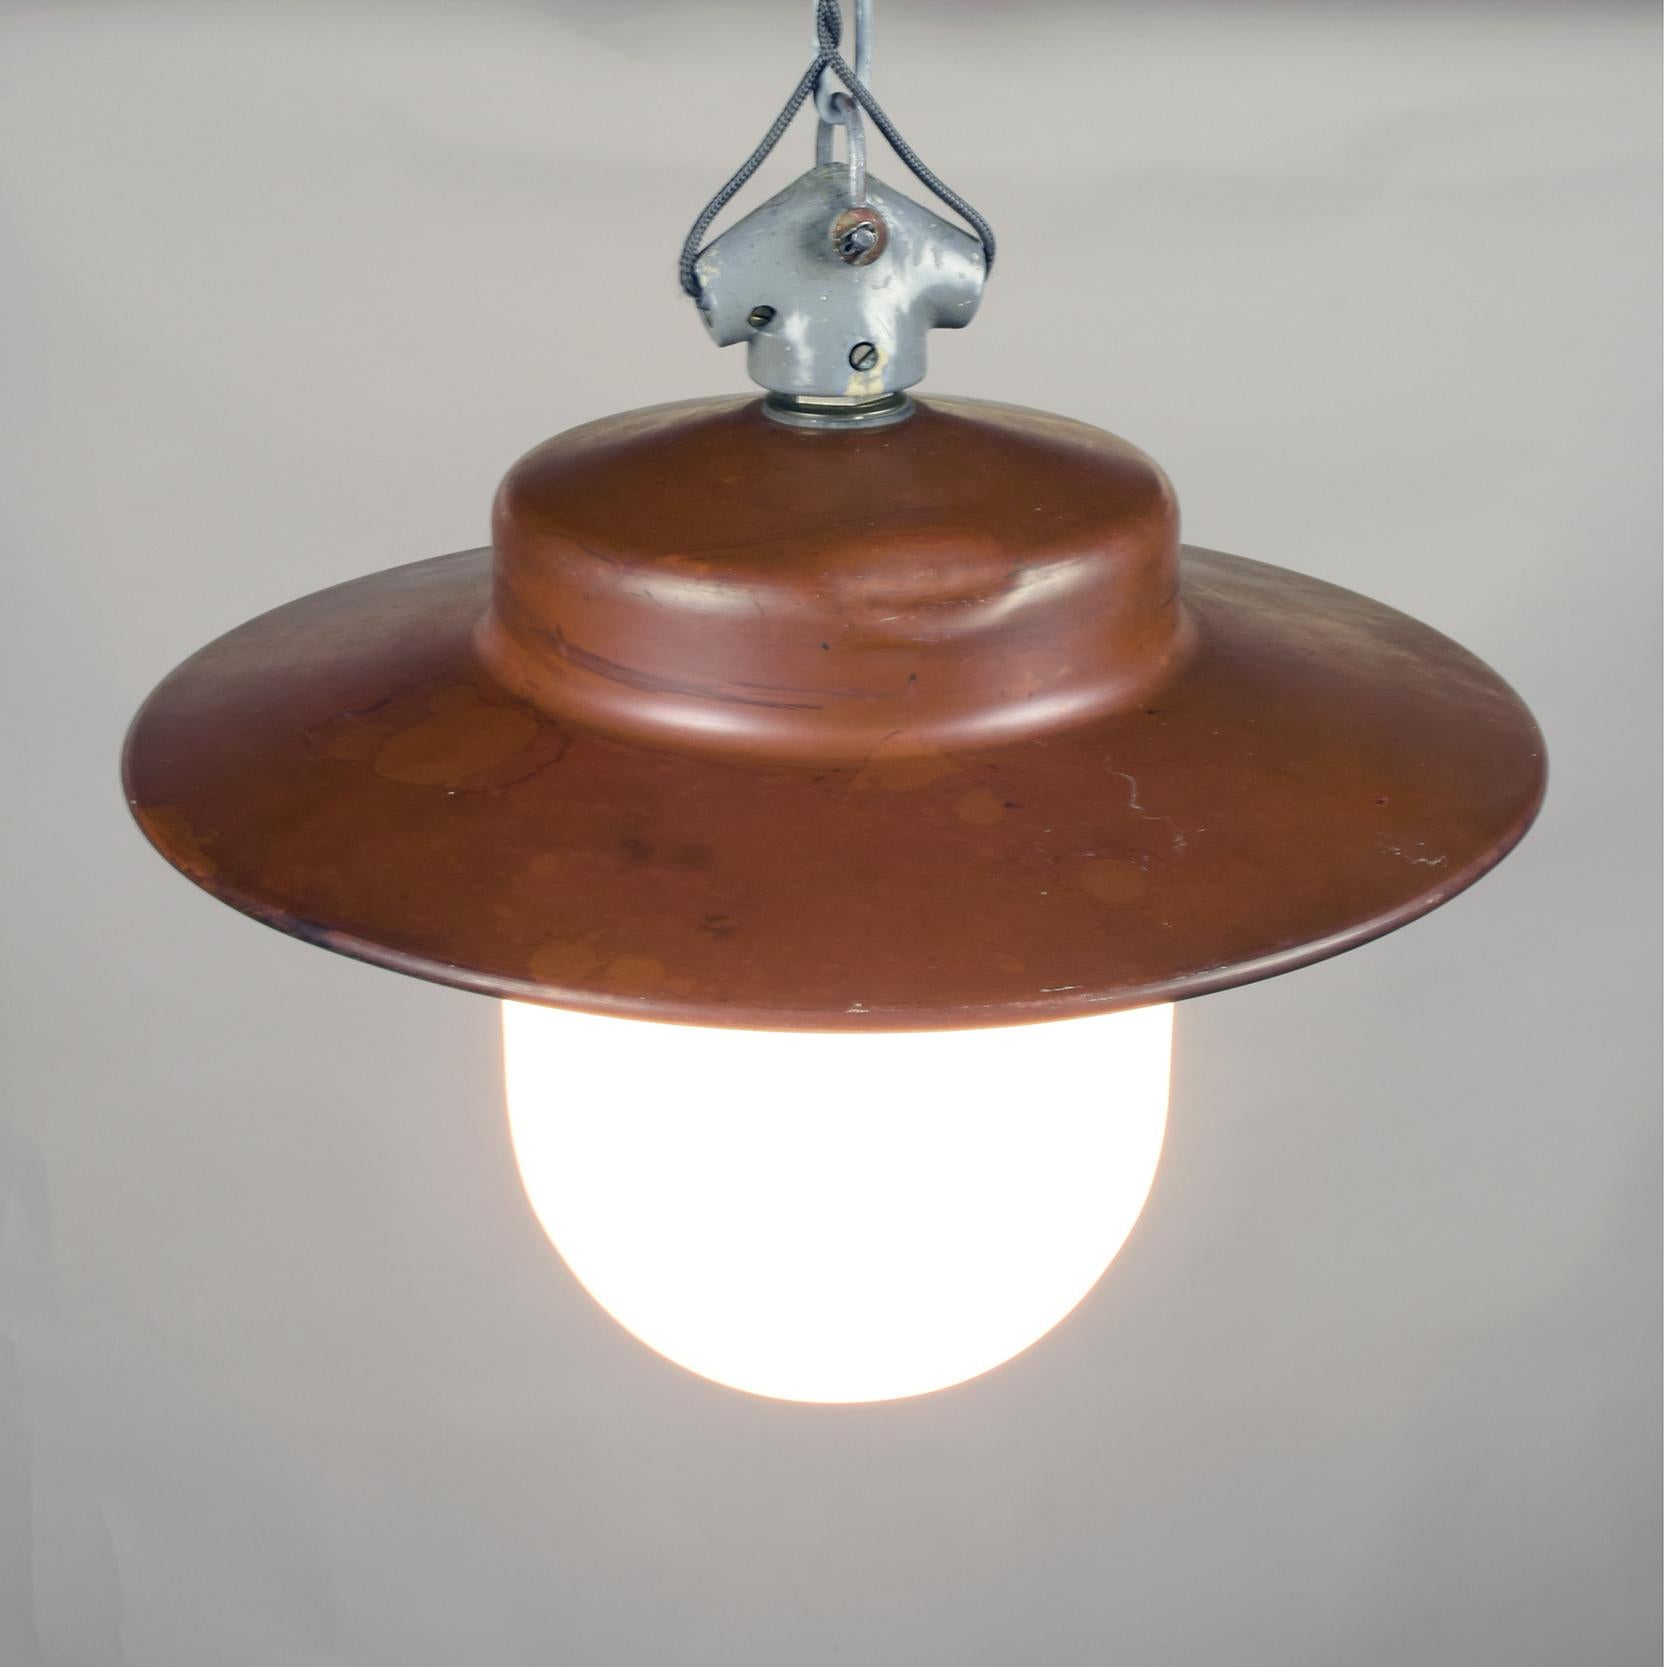 20th Century B.A.G. Turgi Industrial 1930s Bauhaus Pendant Lamp Attributed to Hin Bredendieck For Sale